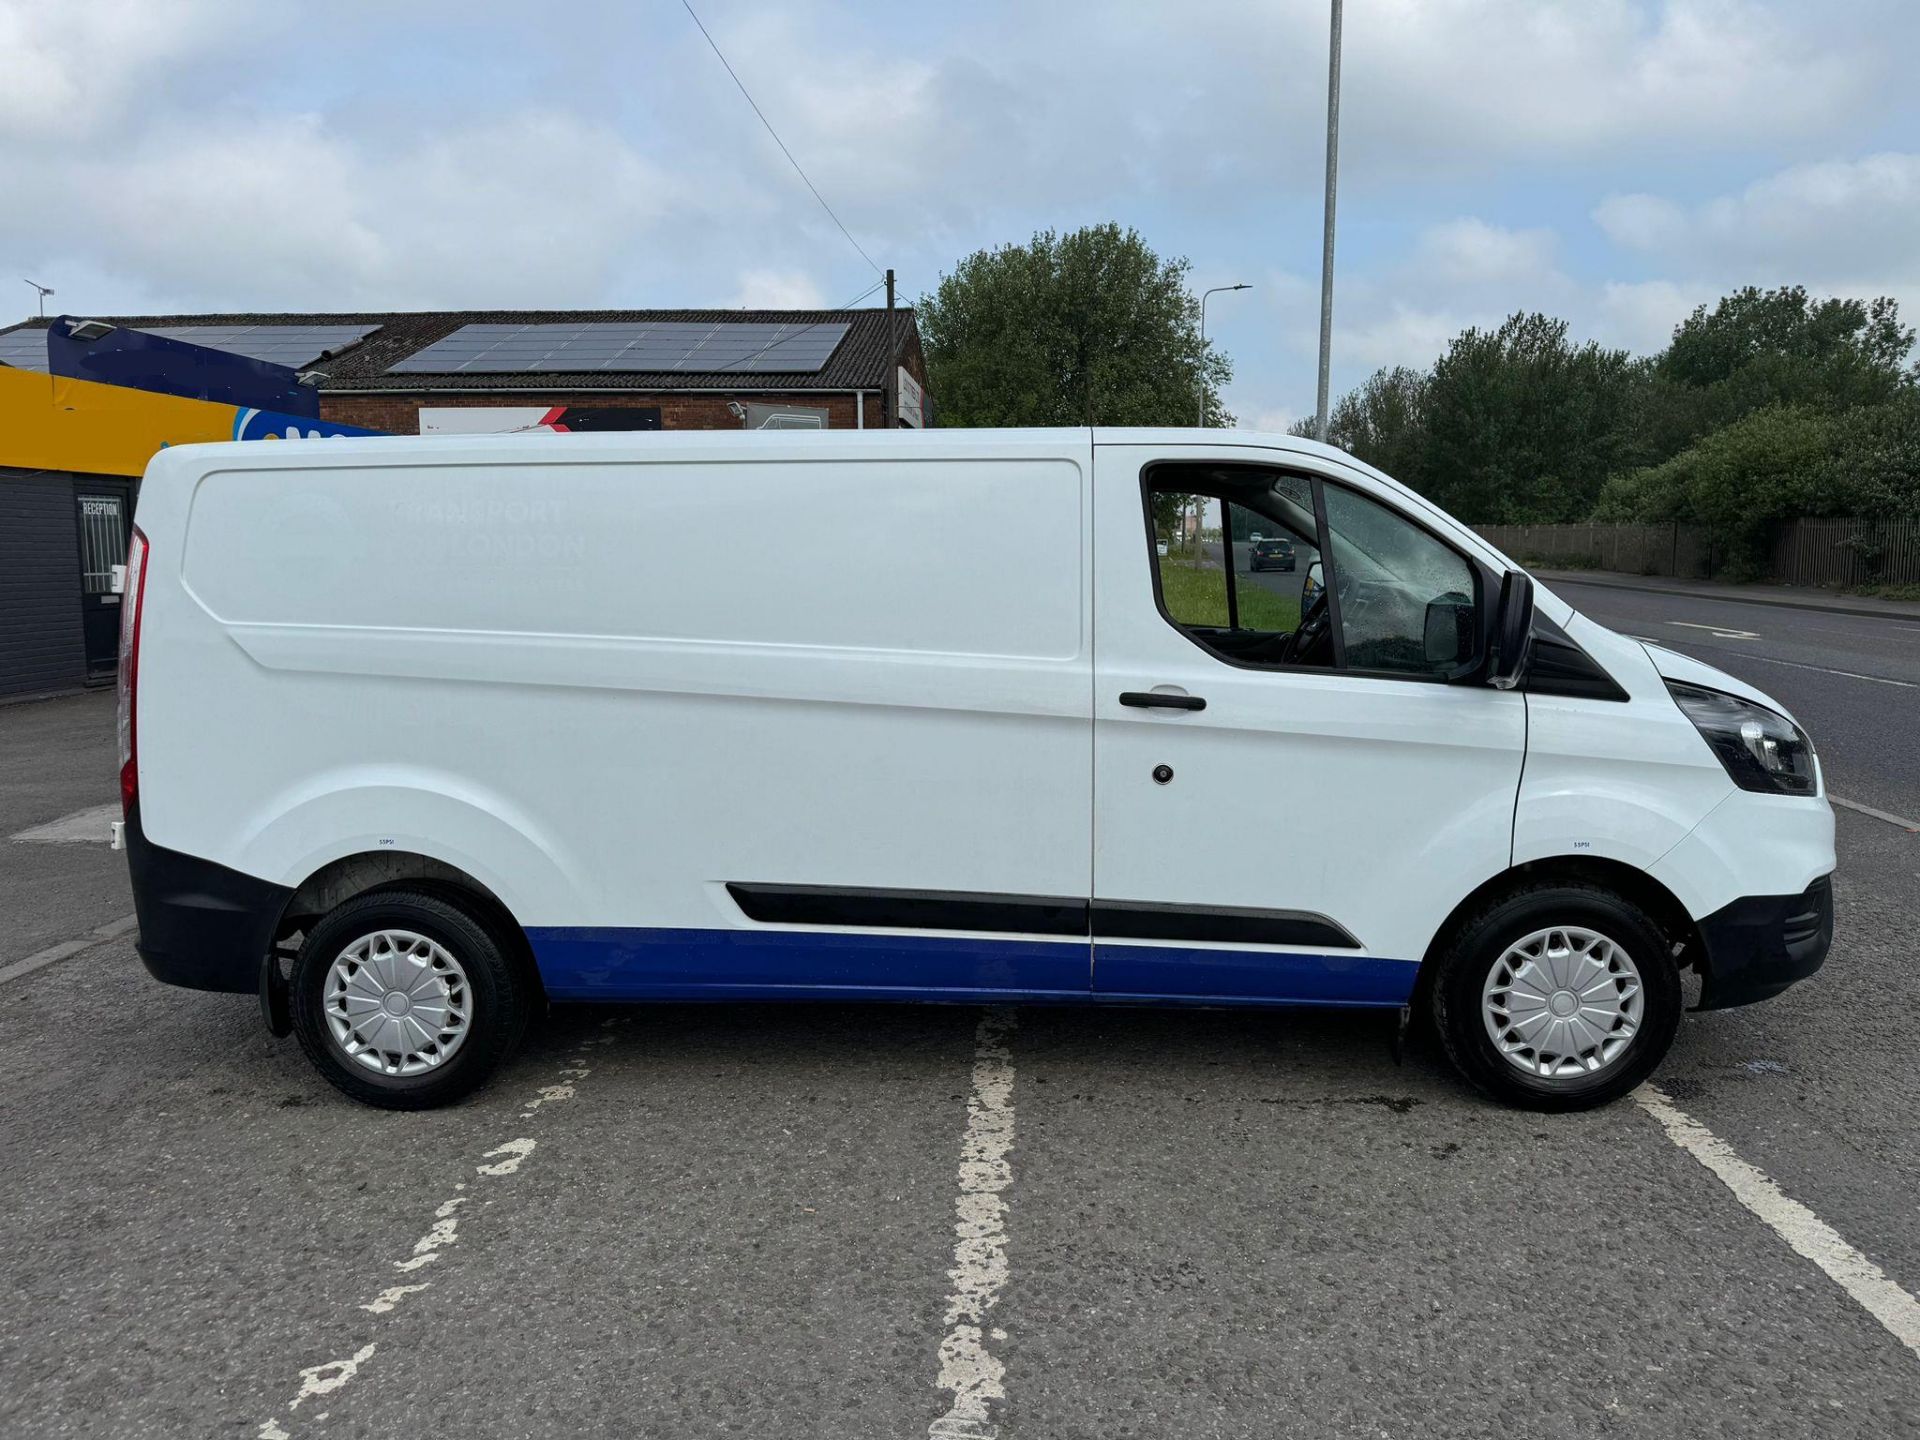 2019 68 FORD TRANSIT CUSTOM LWB PANEL VAN - 84K MILES - AIR CON - PLY LINED - EURO 6 - Image 9 of 12